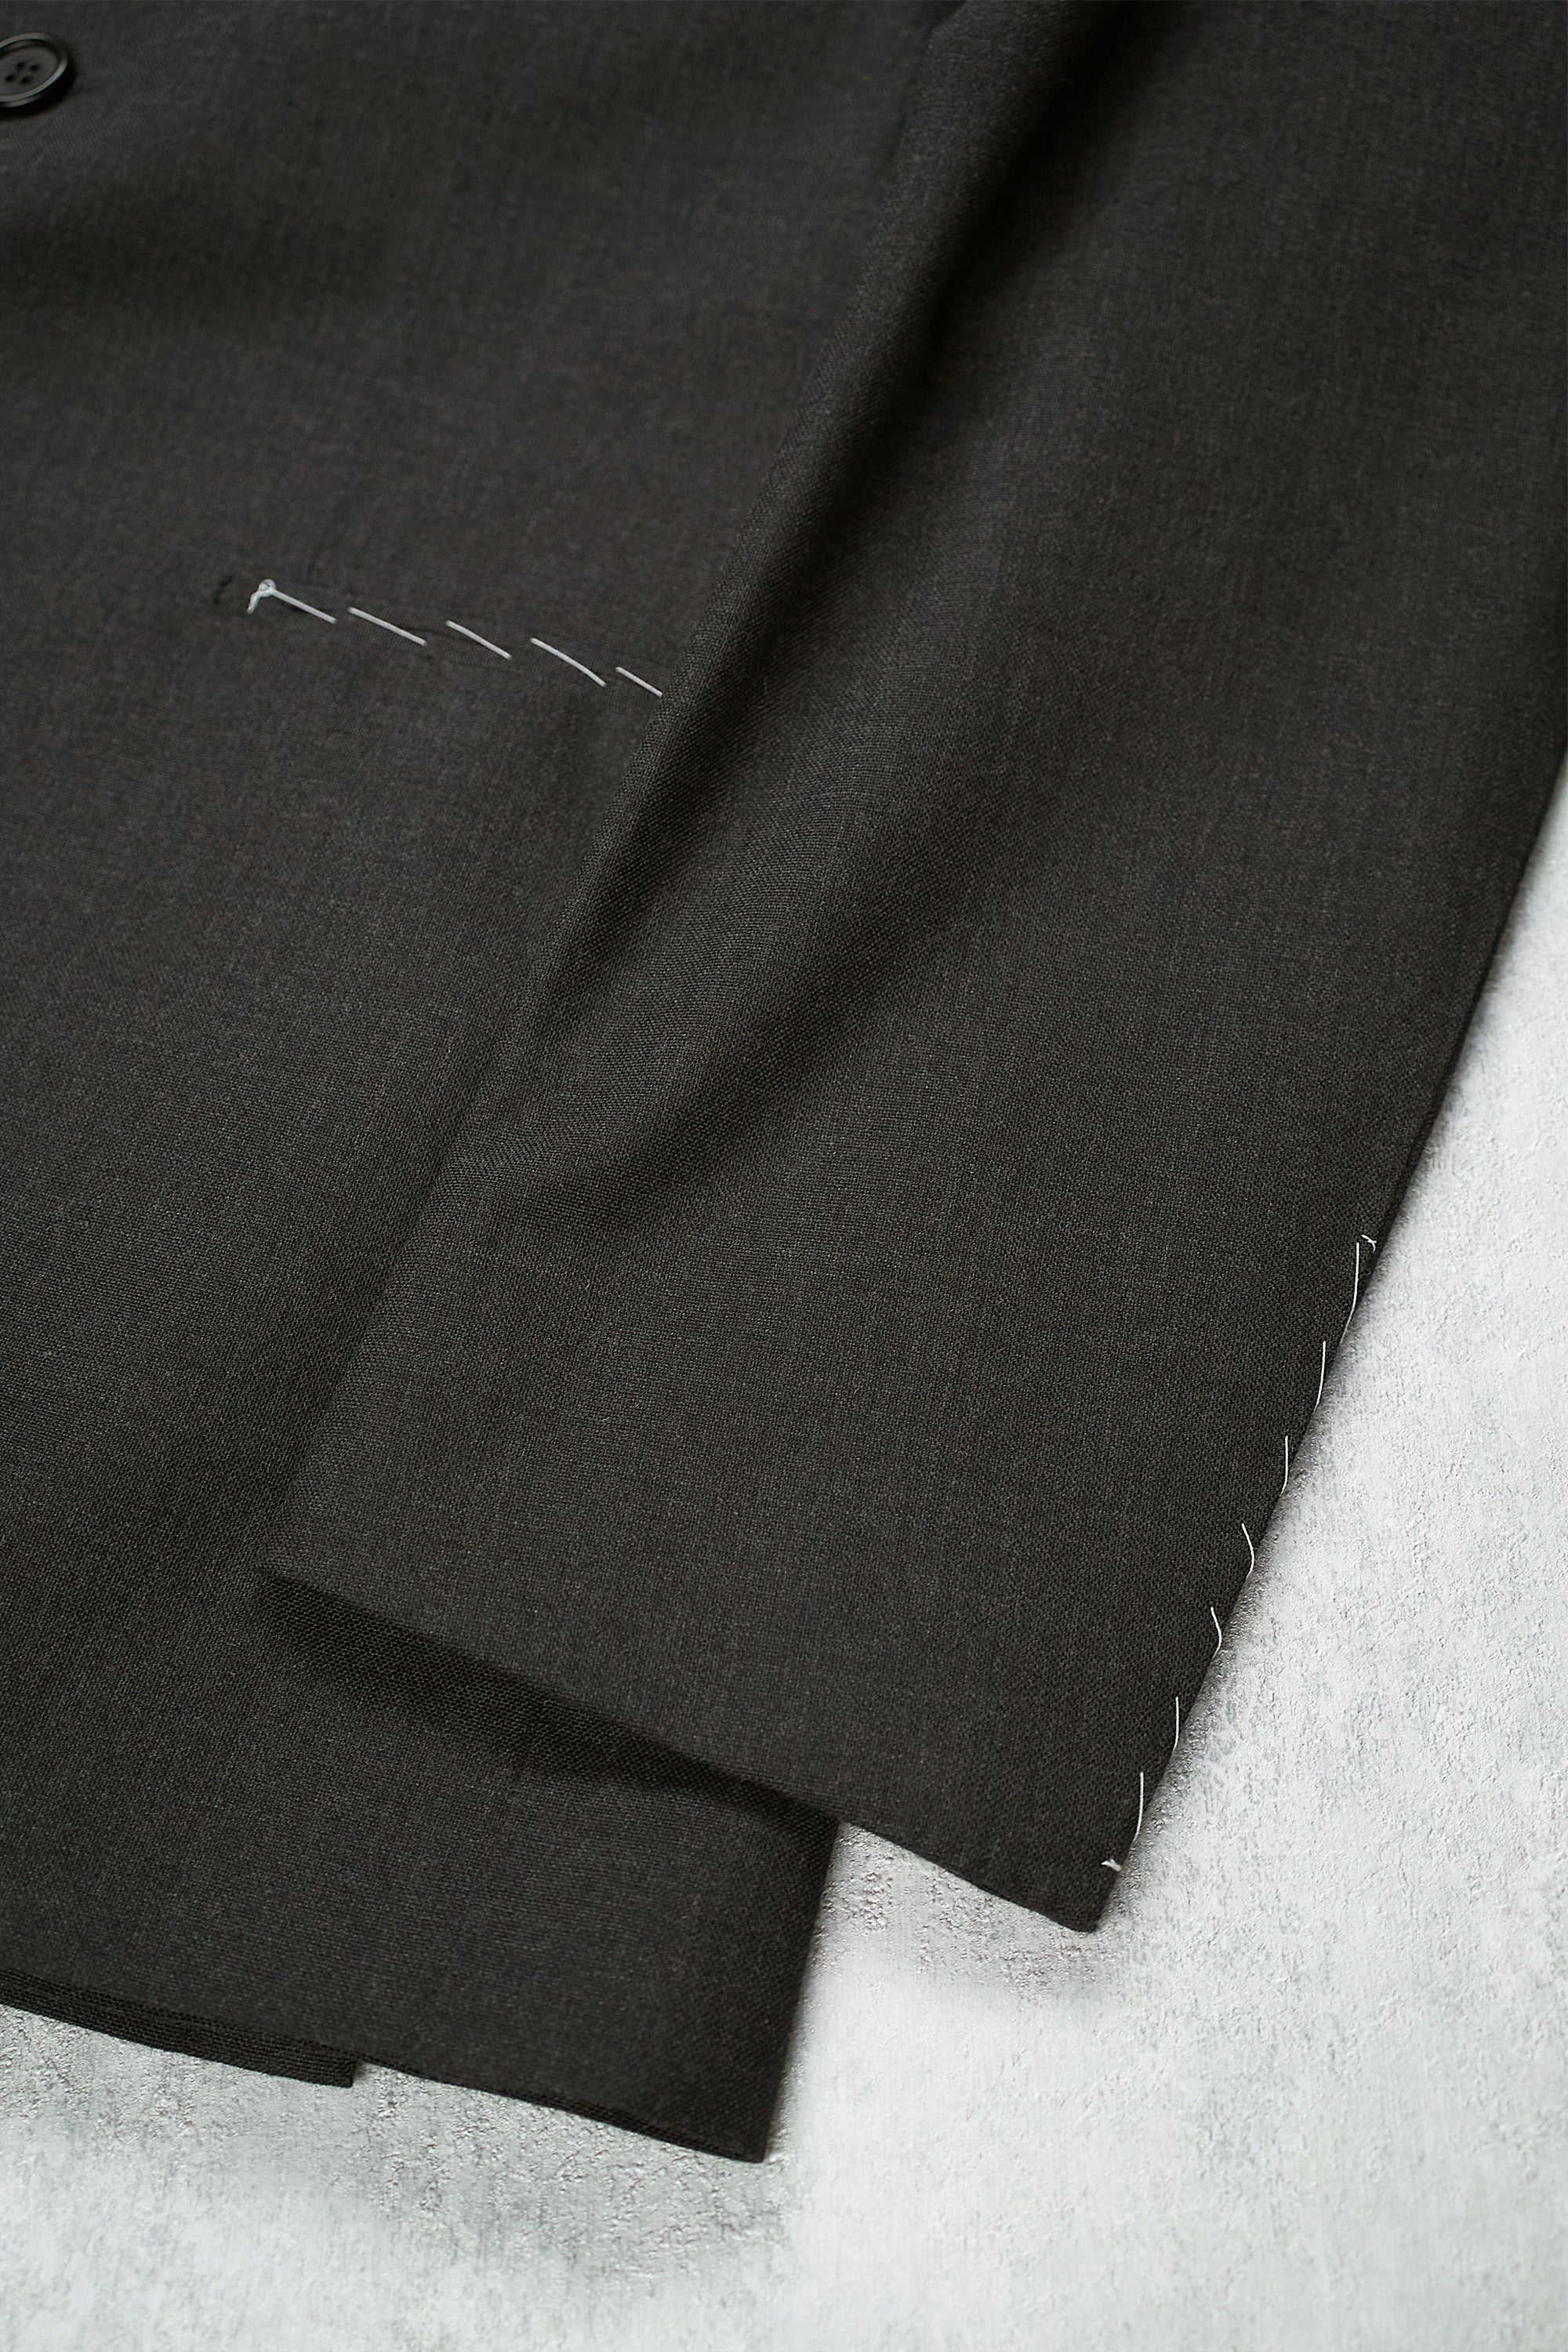 Orazio Luciano Grey Wool Athletic Fit Suit